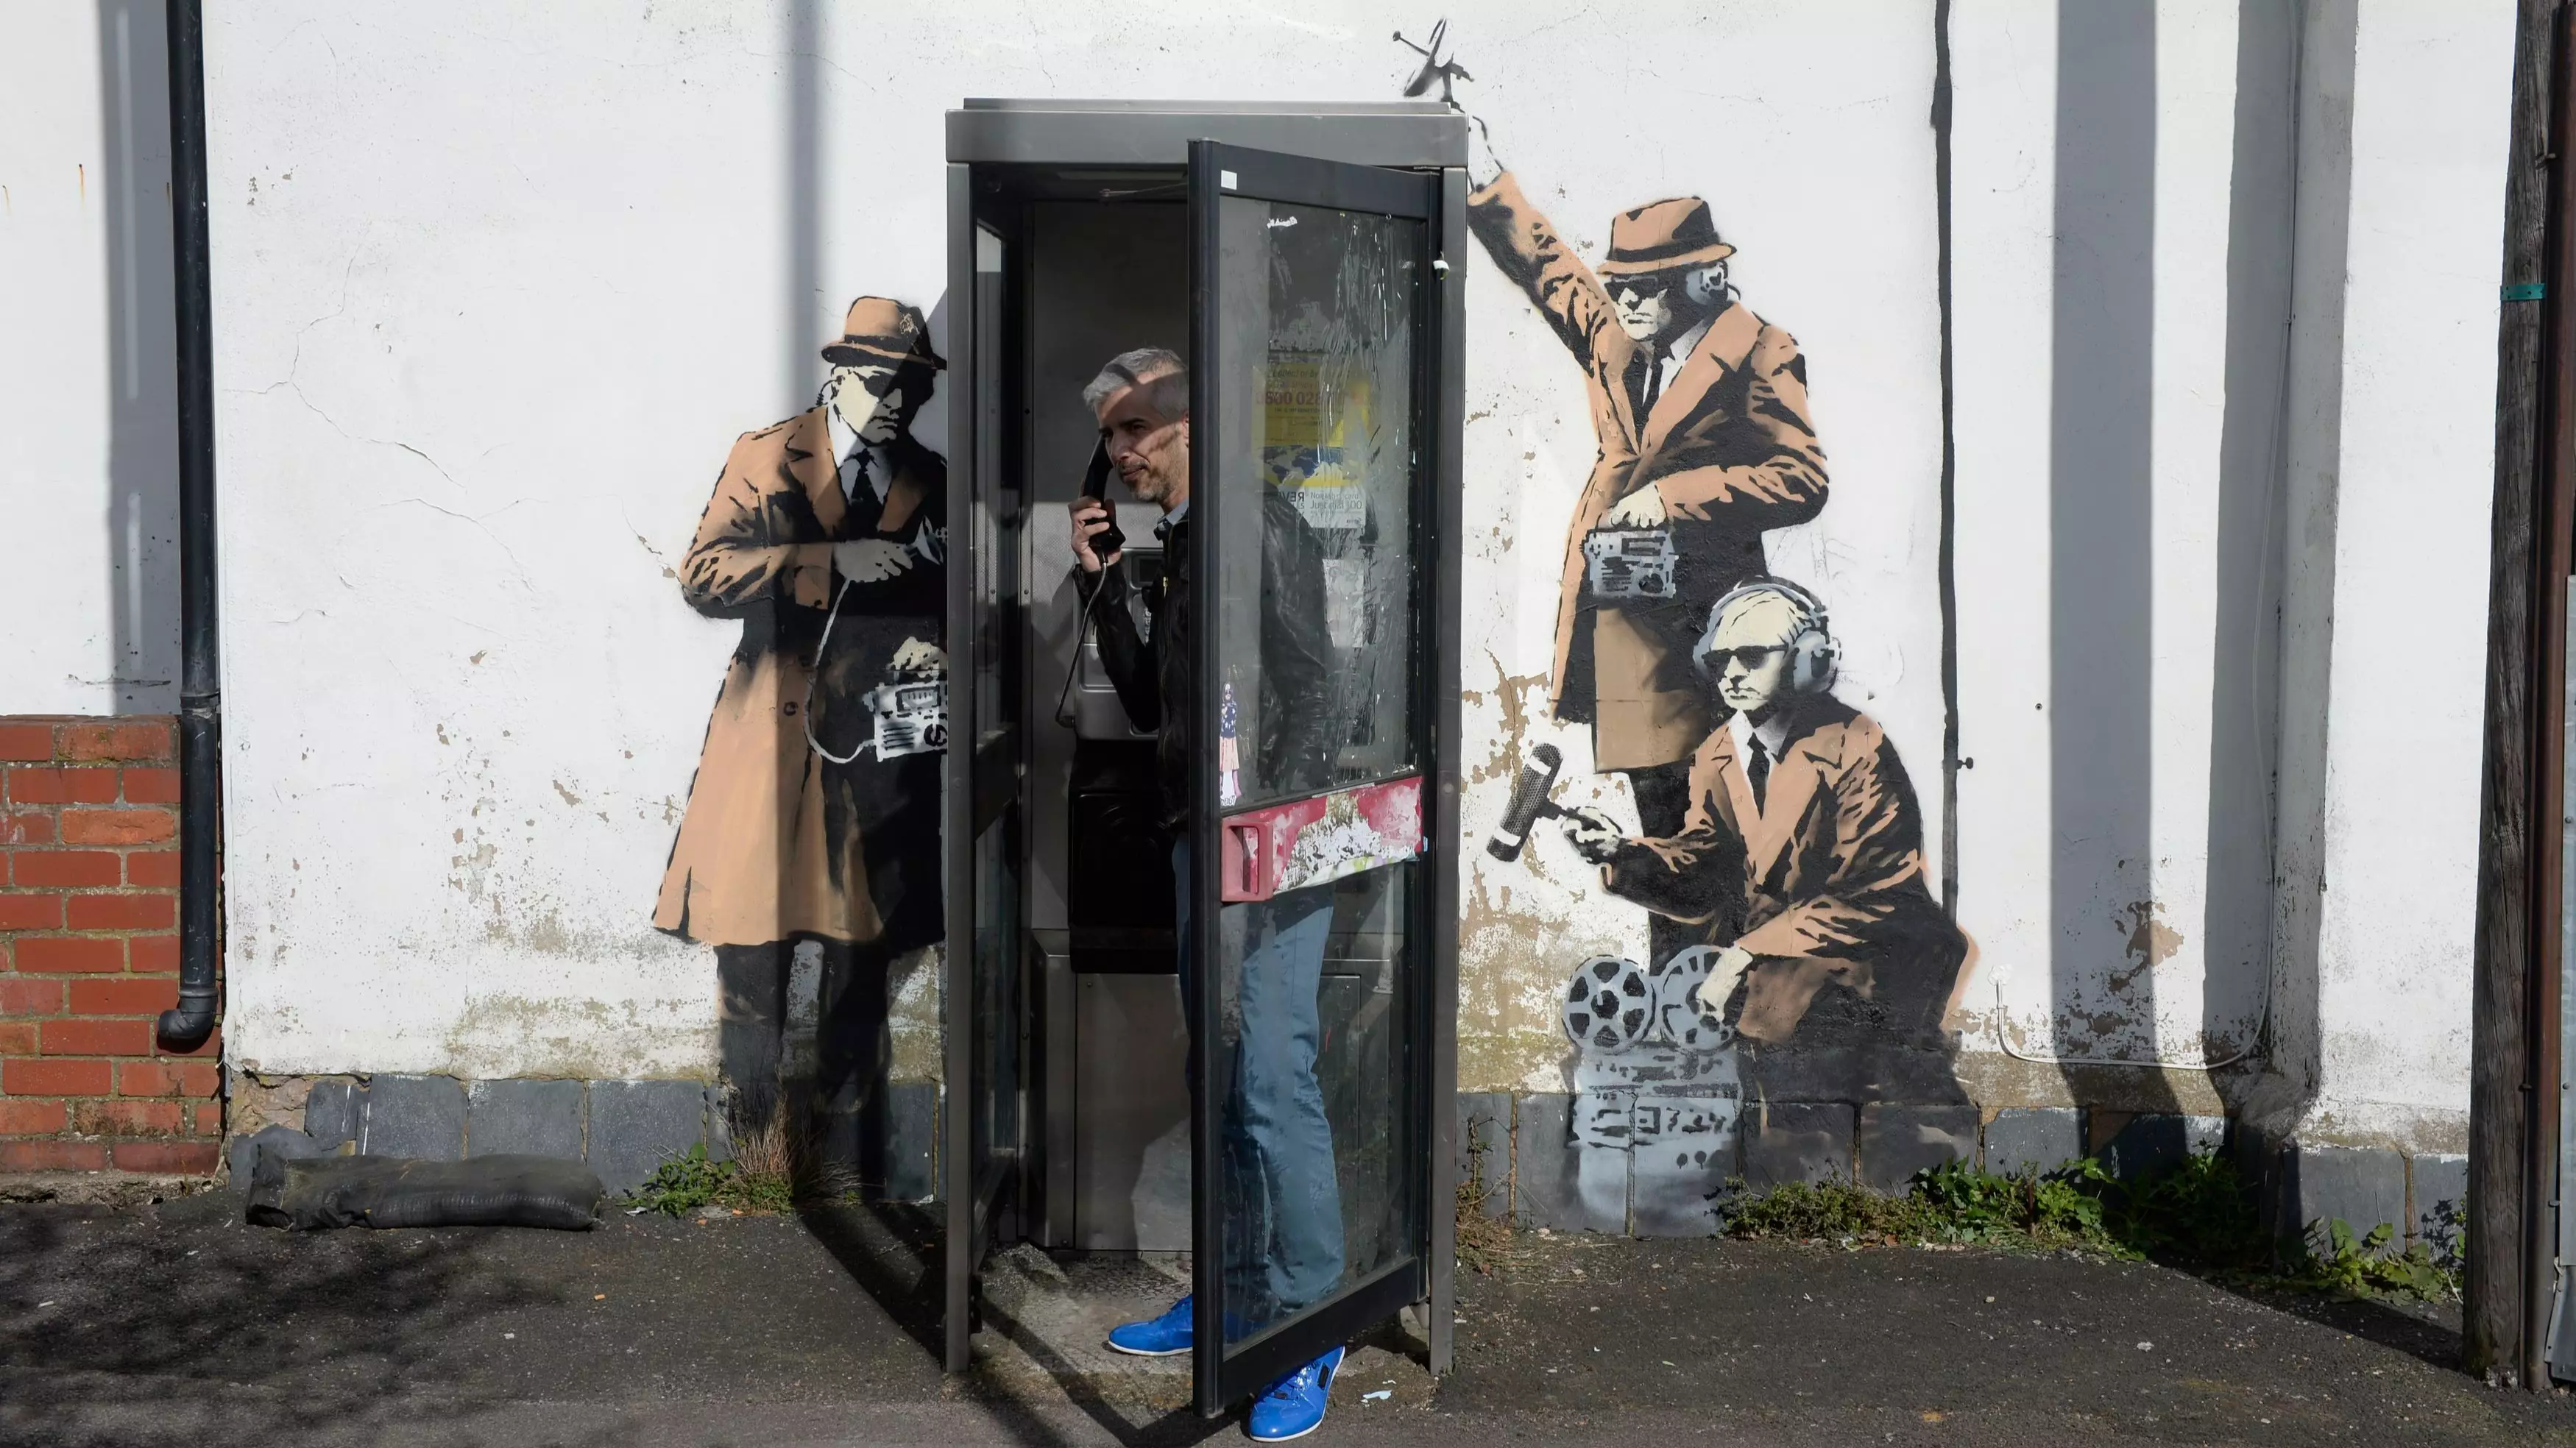 Call Off The Search As New Banksy Theory Claims Street Artist Is Actually Four People Working Together 